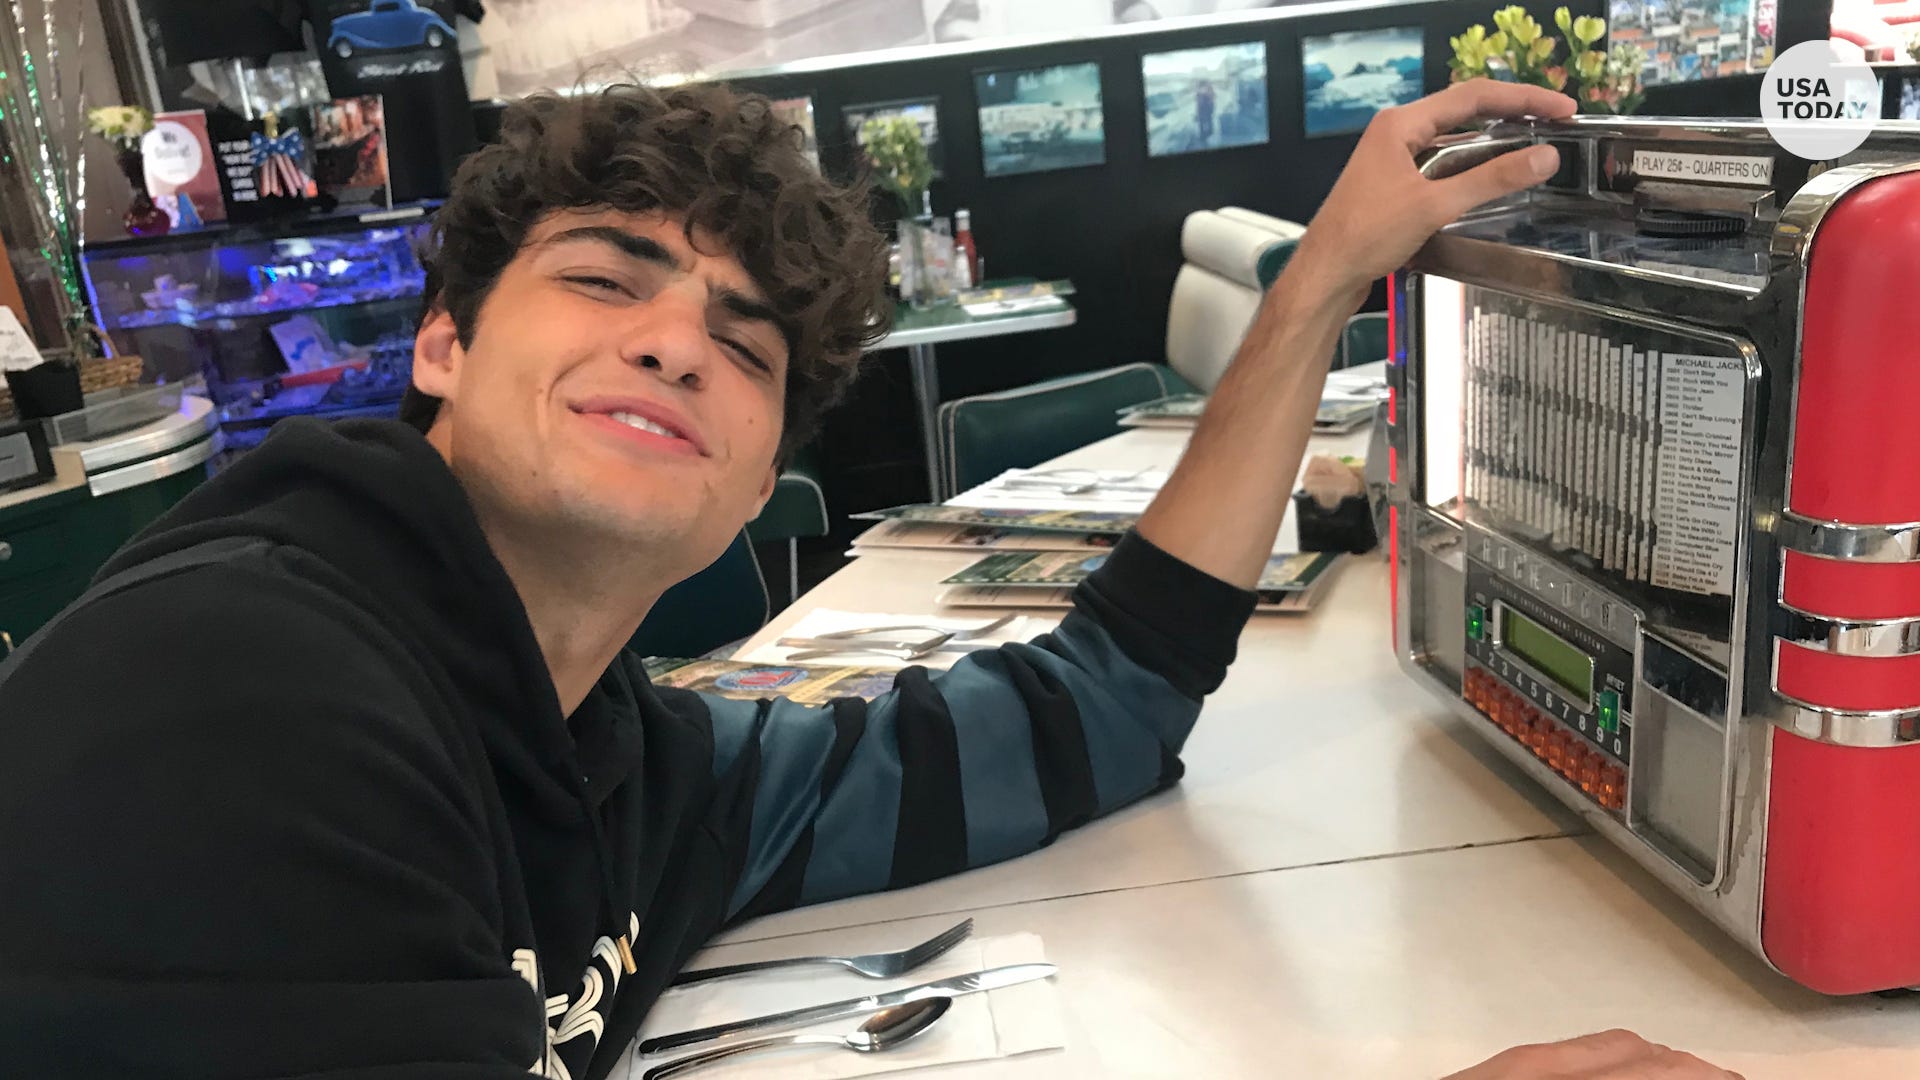 Netflix star Noah Centineo takes you on a diner date